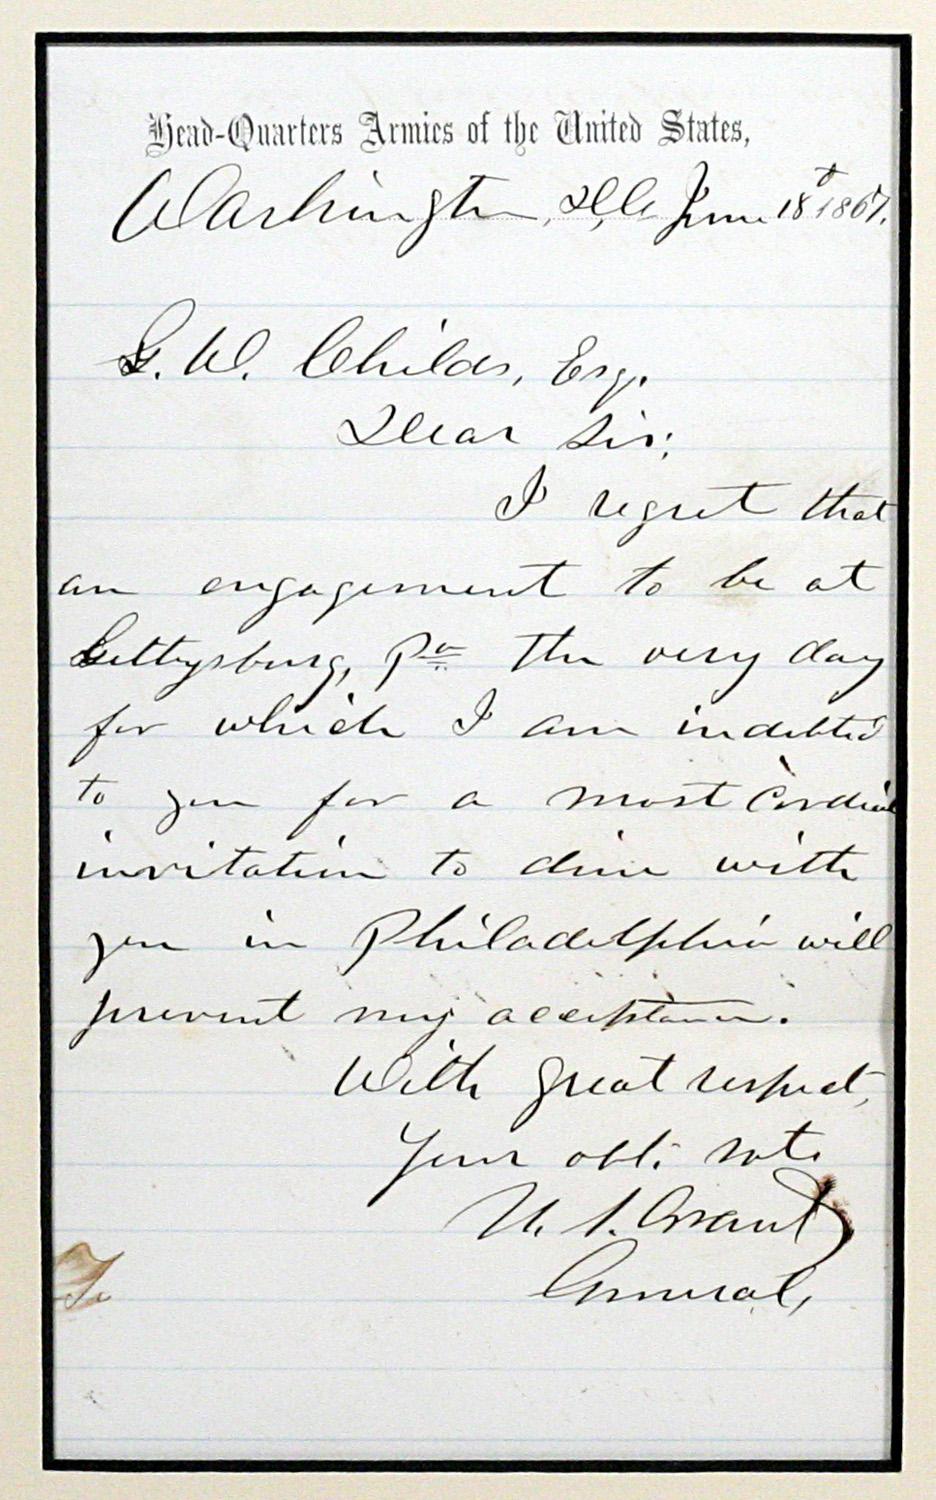 Grant, Ulysses S.
Autograph letter signed

Autograph letter by grant mentioning his plans for his first visit to Gettysburg.

Although Gettysburg, Pennsylvania towers over the Civil War in importance, by 1867 - a full two years after the war